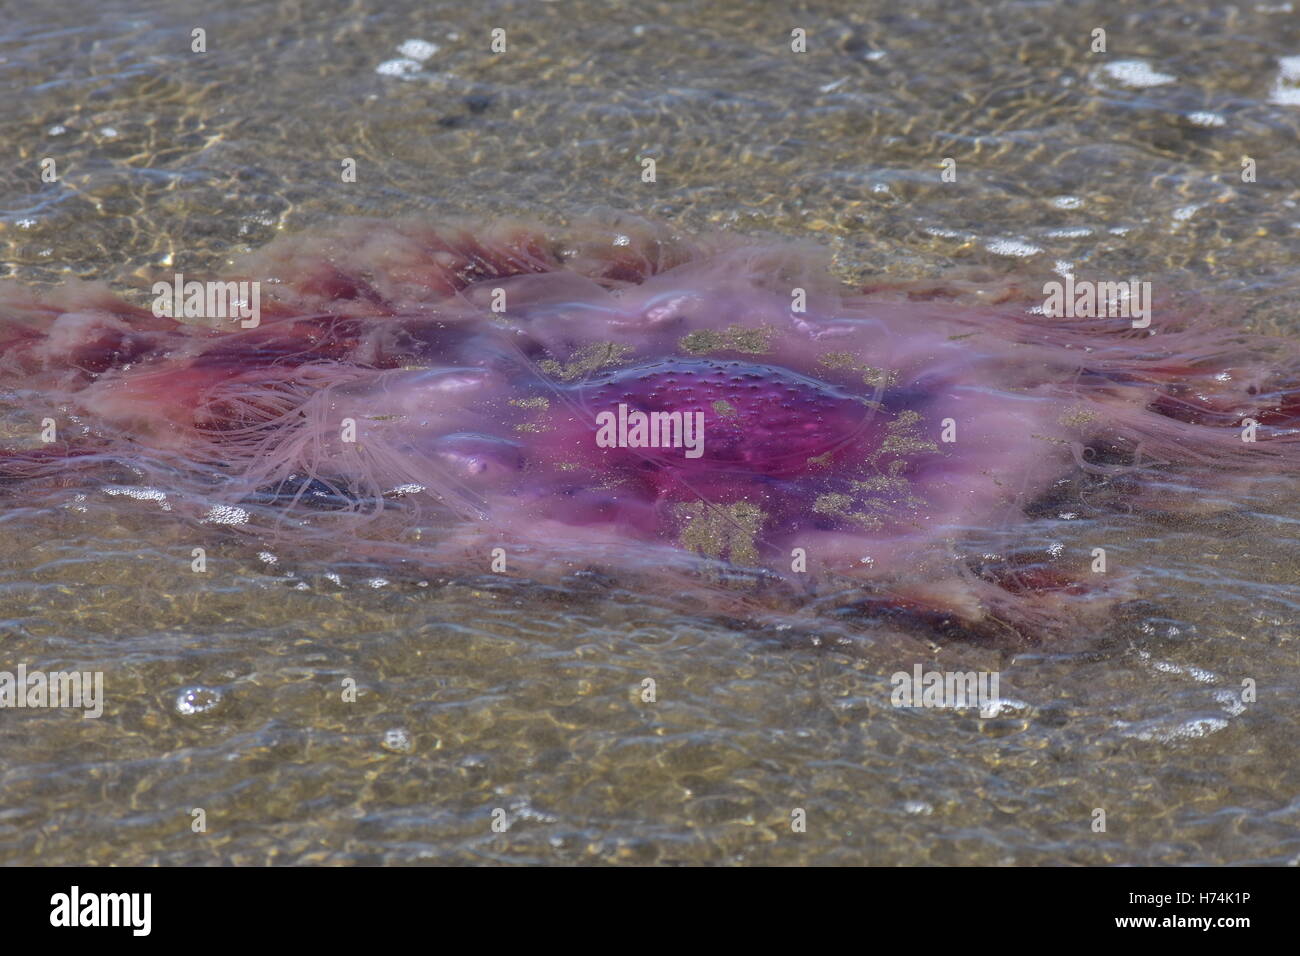 Large jellyfish stranded in shallow water. Stock Photo